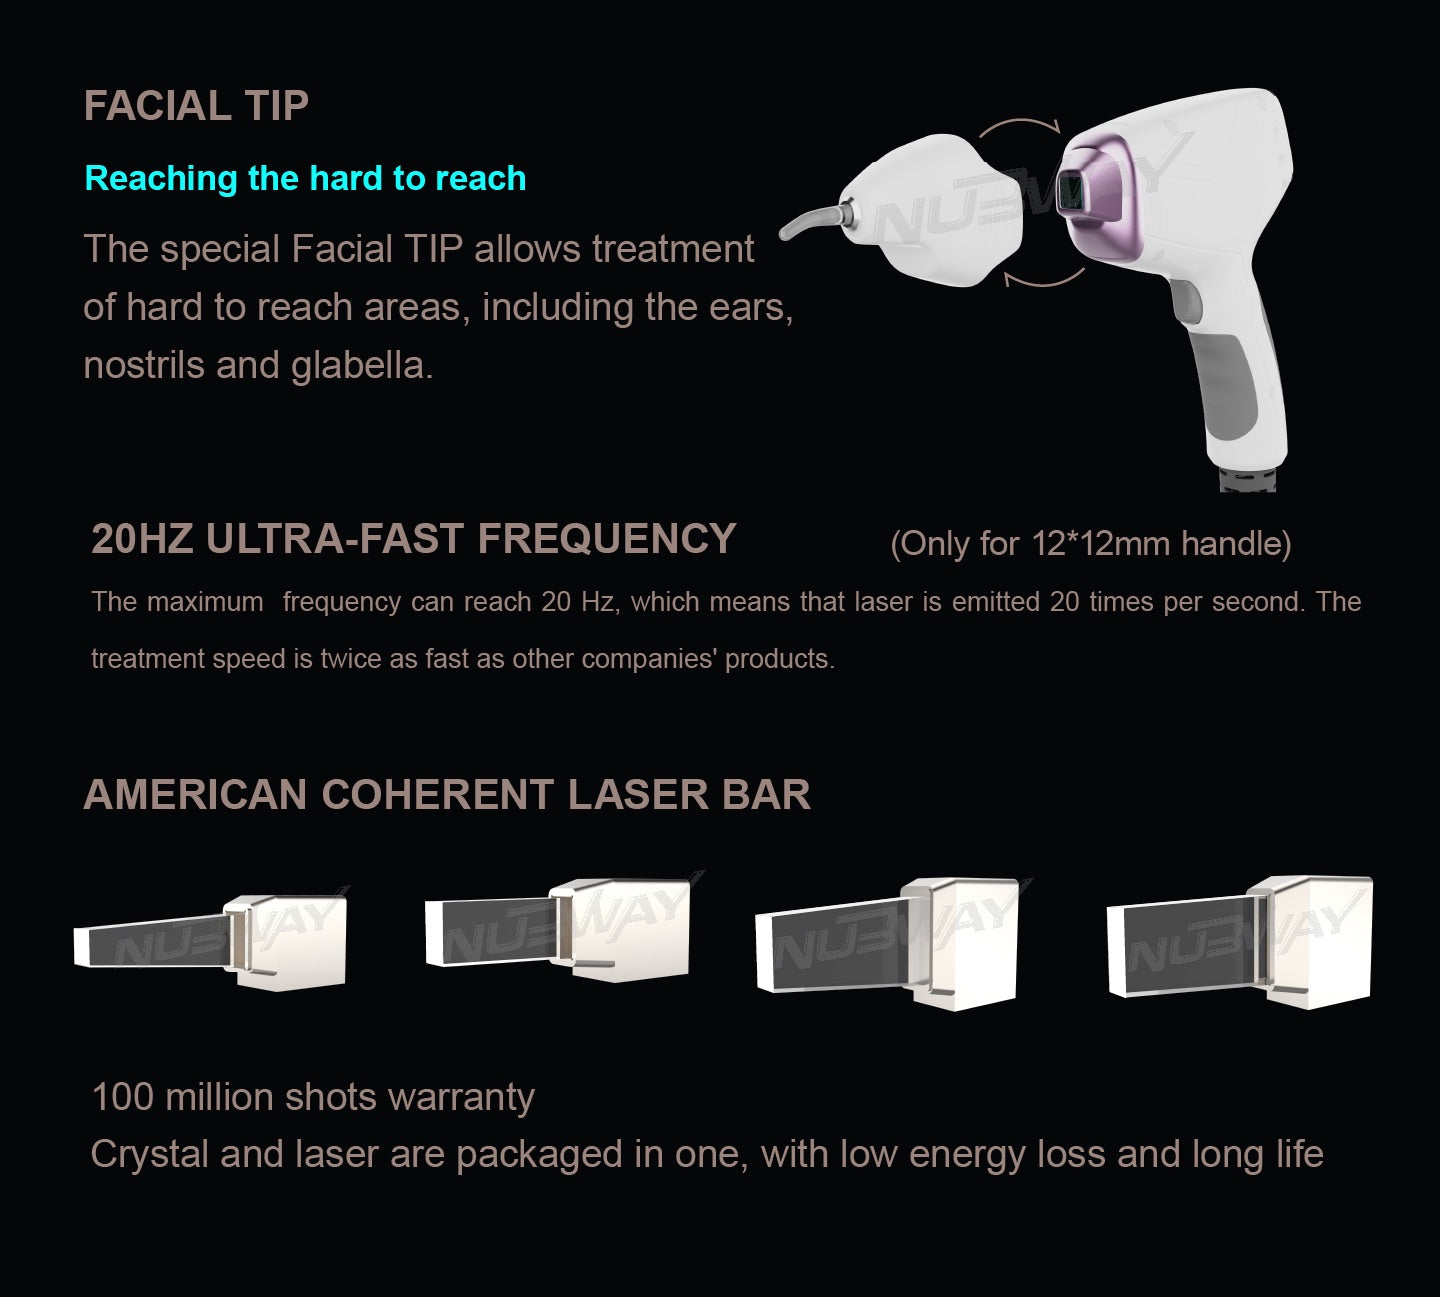 Facial Tip, 20Hz fast frequency of laser speed, American Coherent Laser Bar with 100 million shots